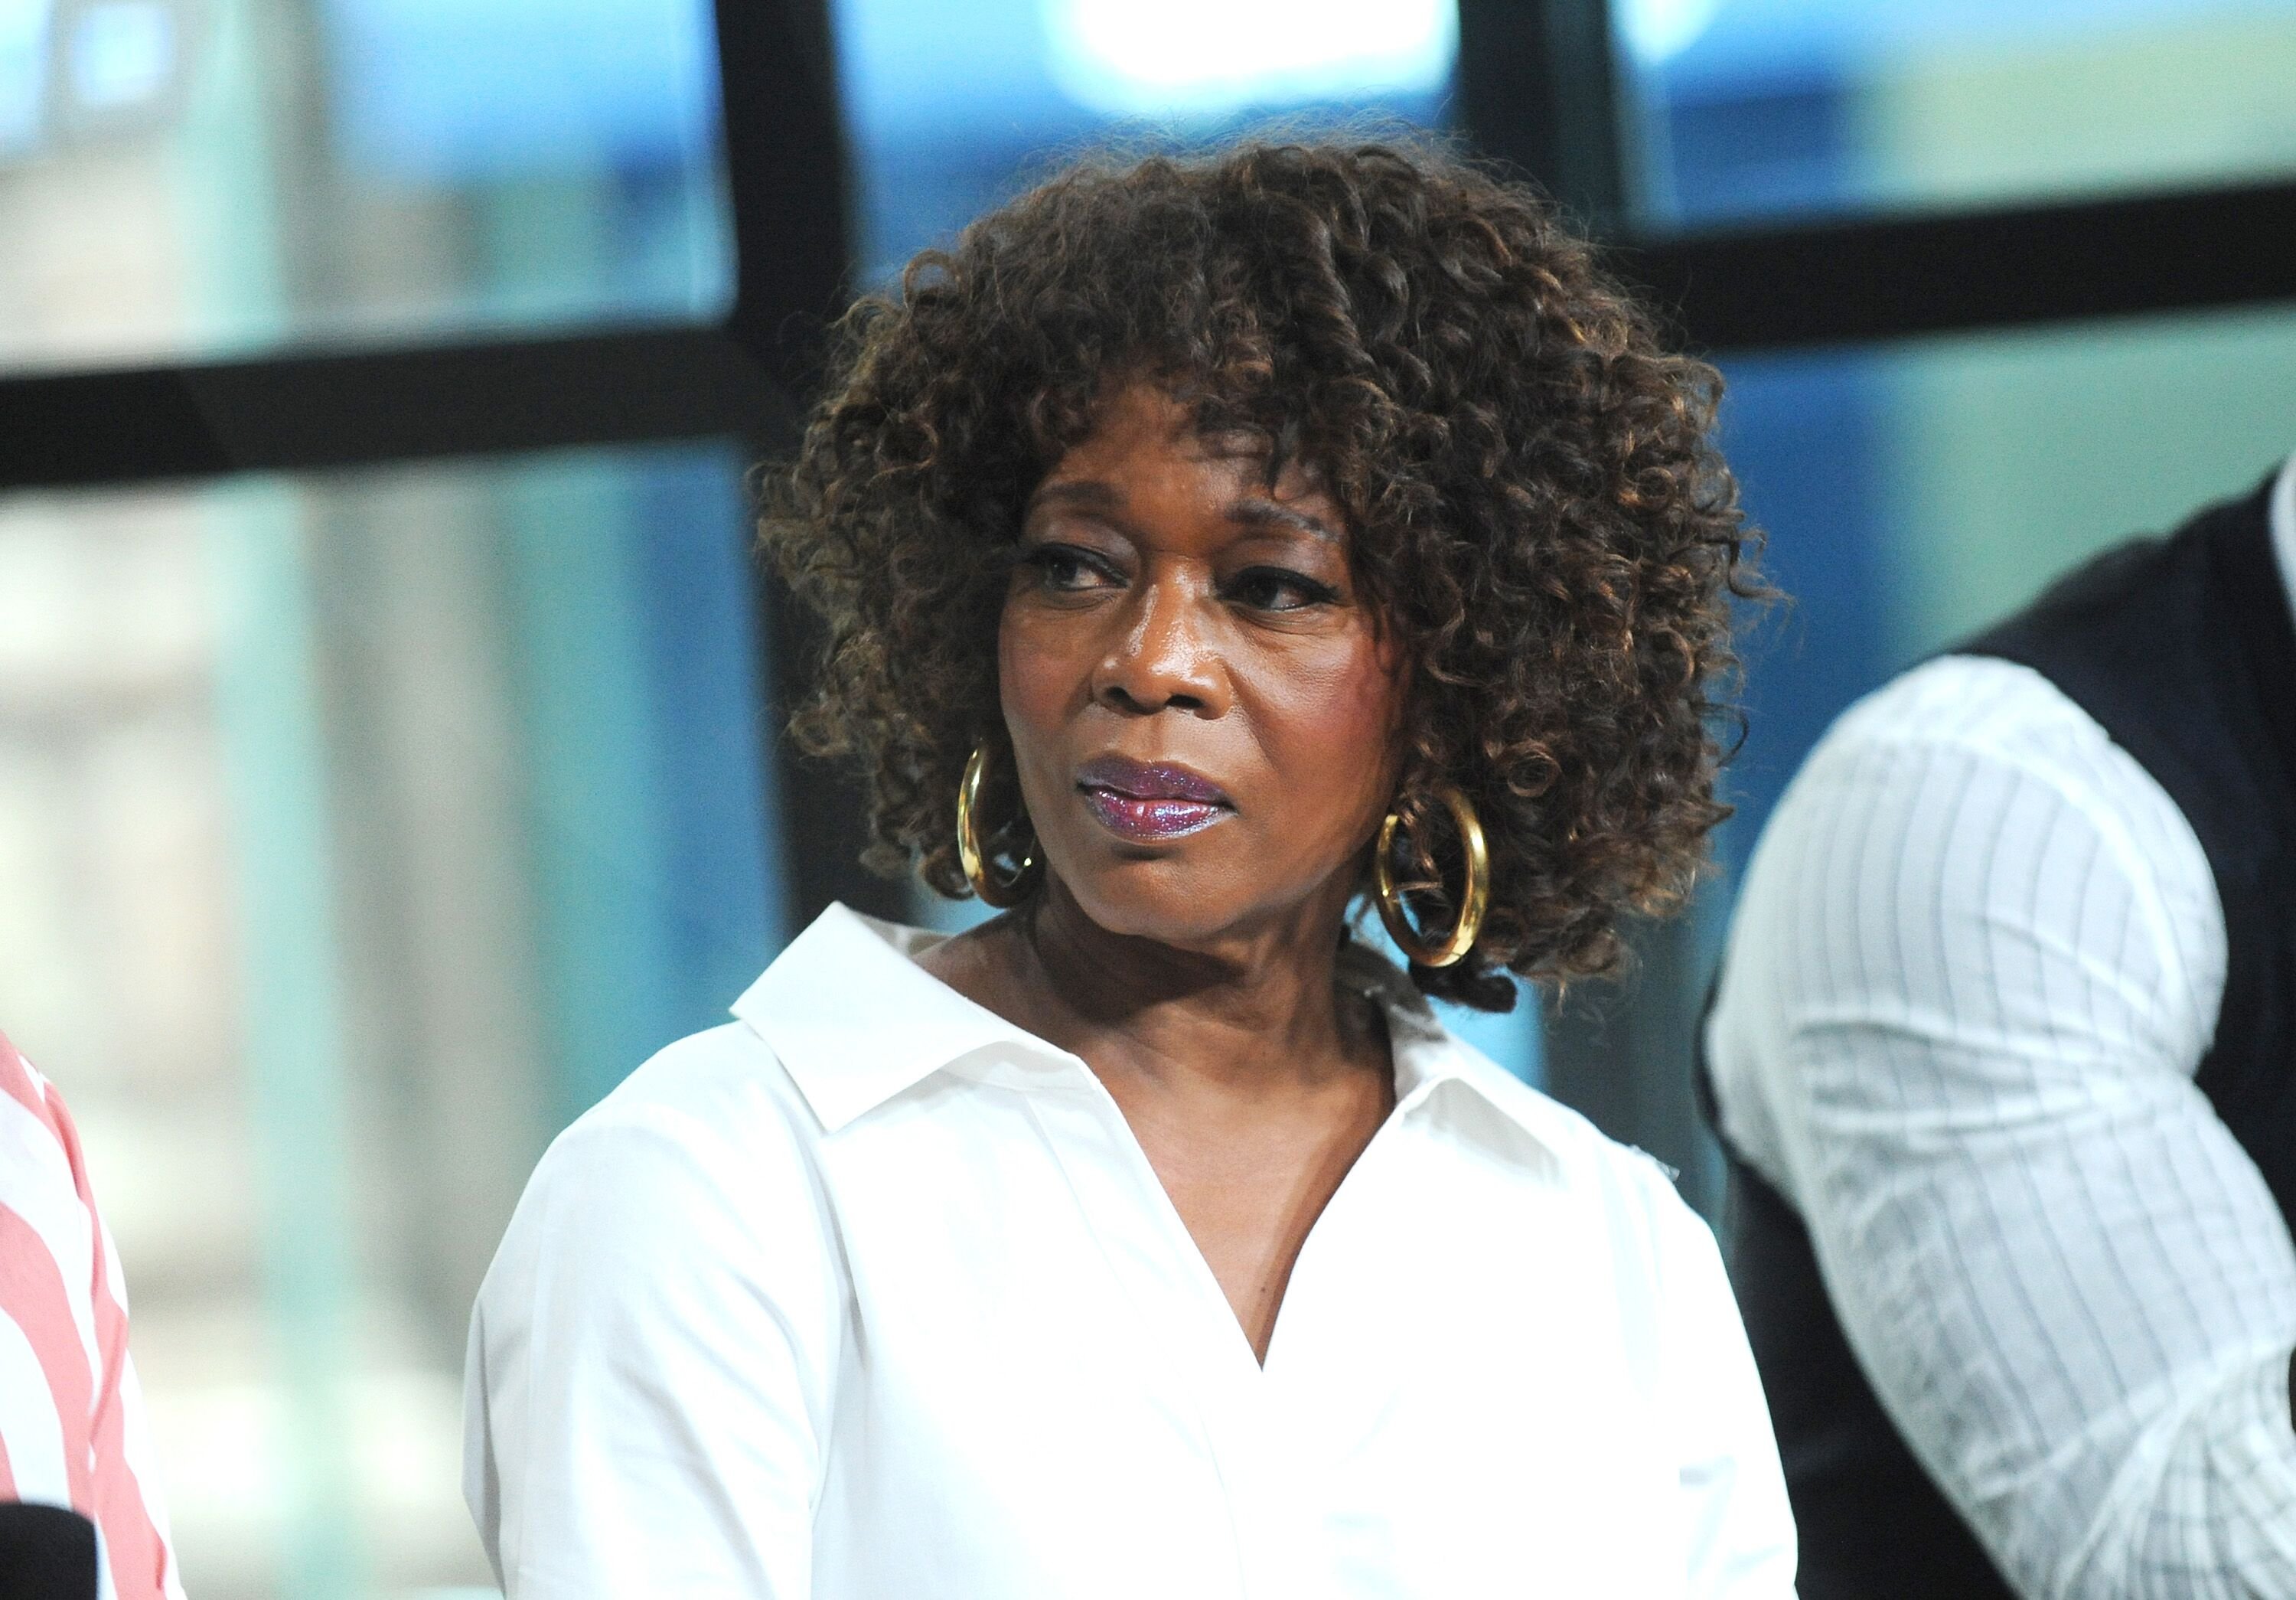 Alfre Woodard at the Build Studio discussing Marvel's "Luke Cage" on June 20, 2018, in New York City. | Source: Getty Images